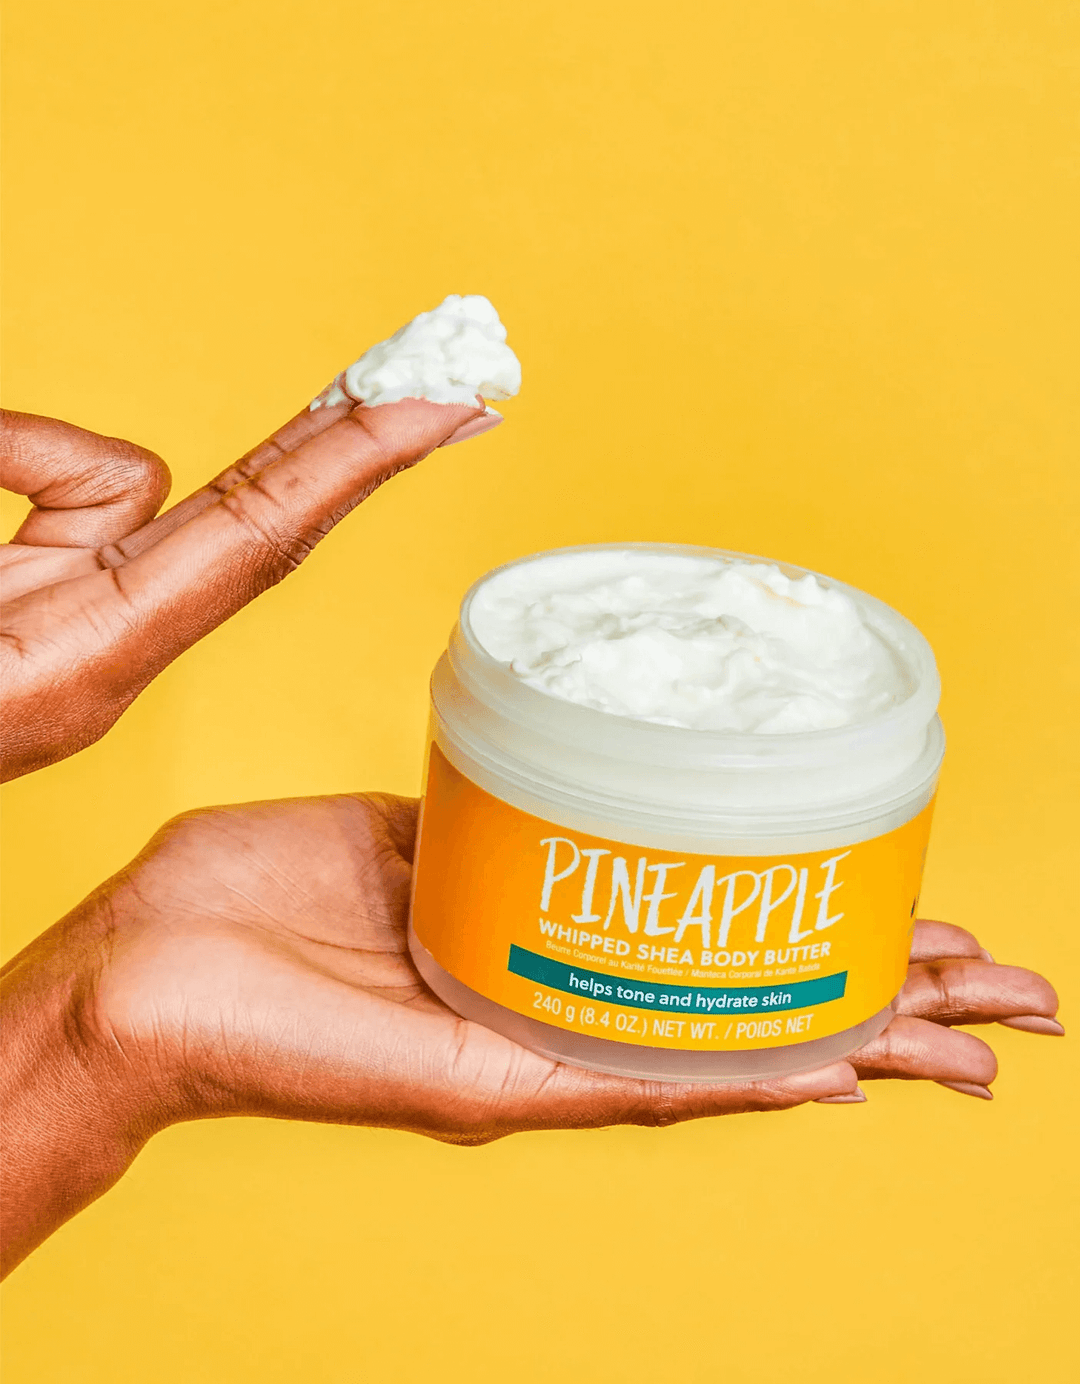 Tree Hut Pineapple Whipped Body Butter